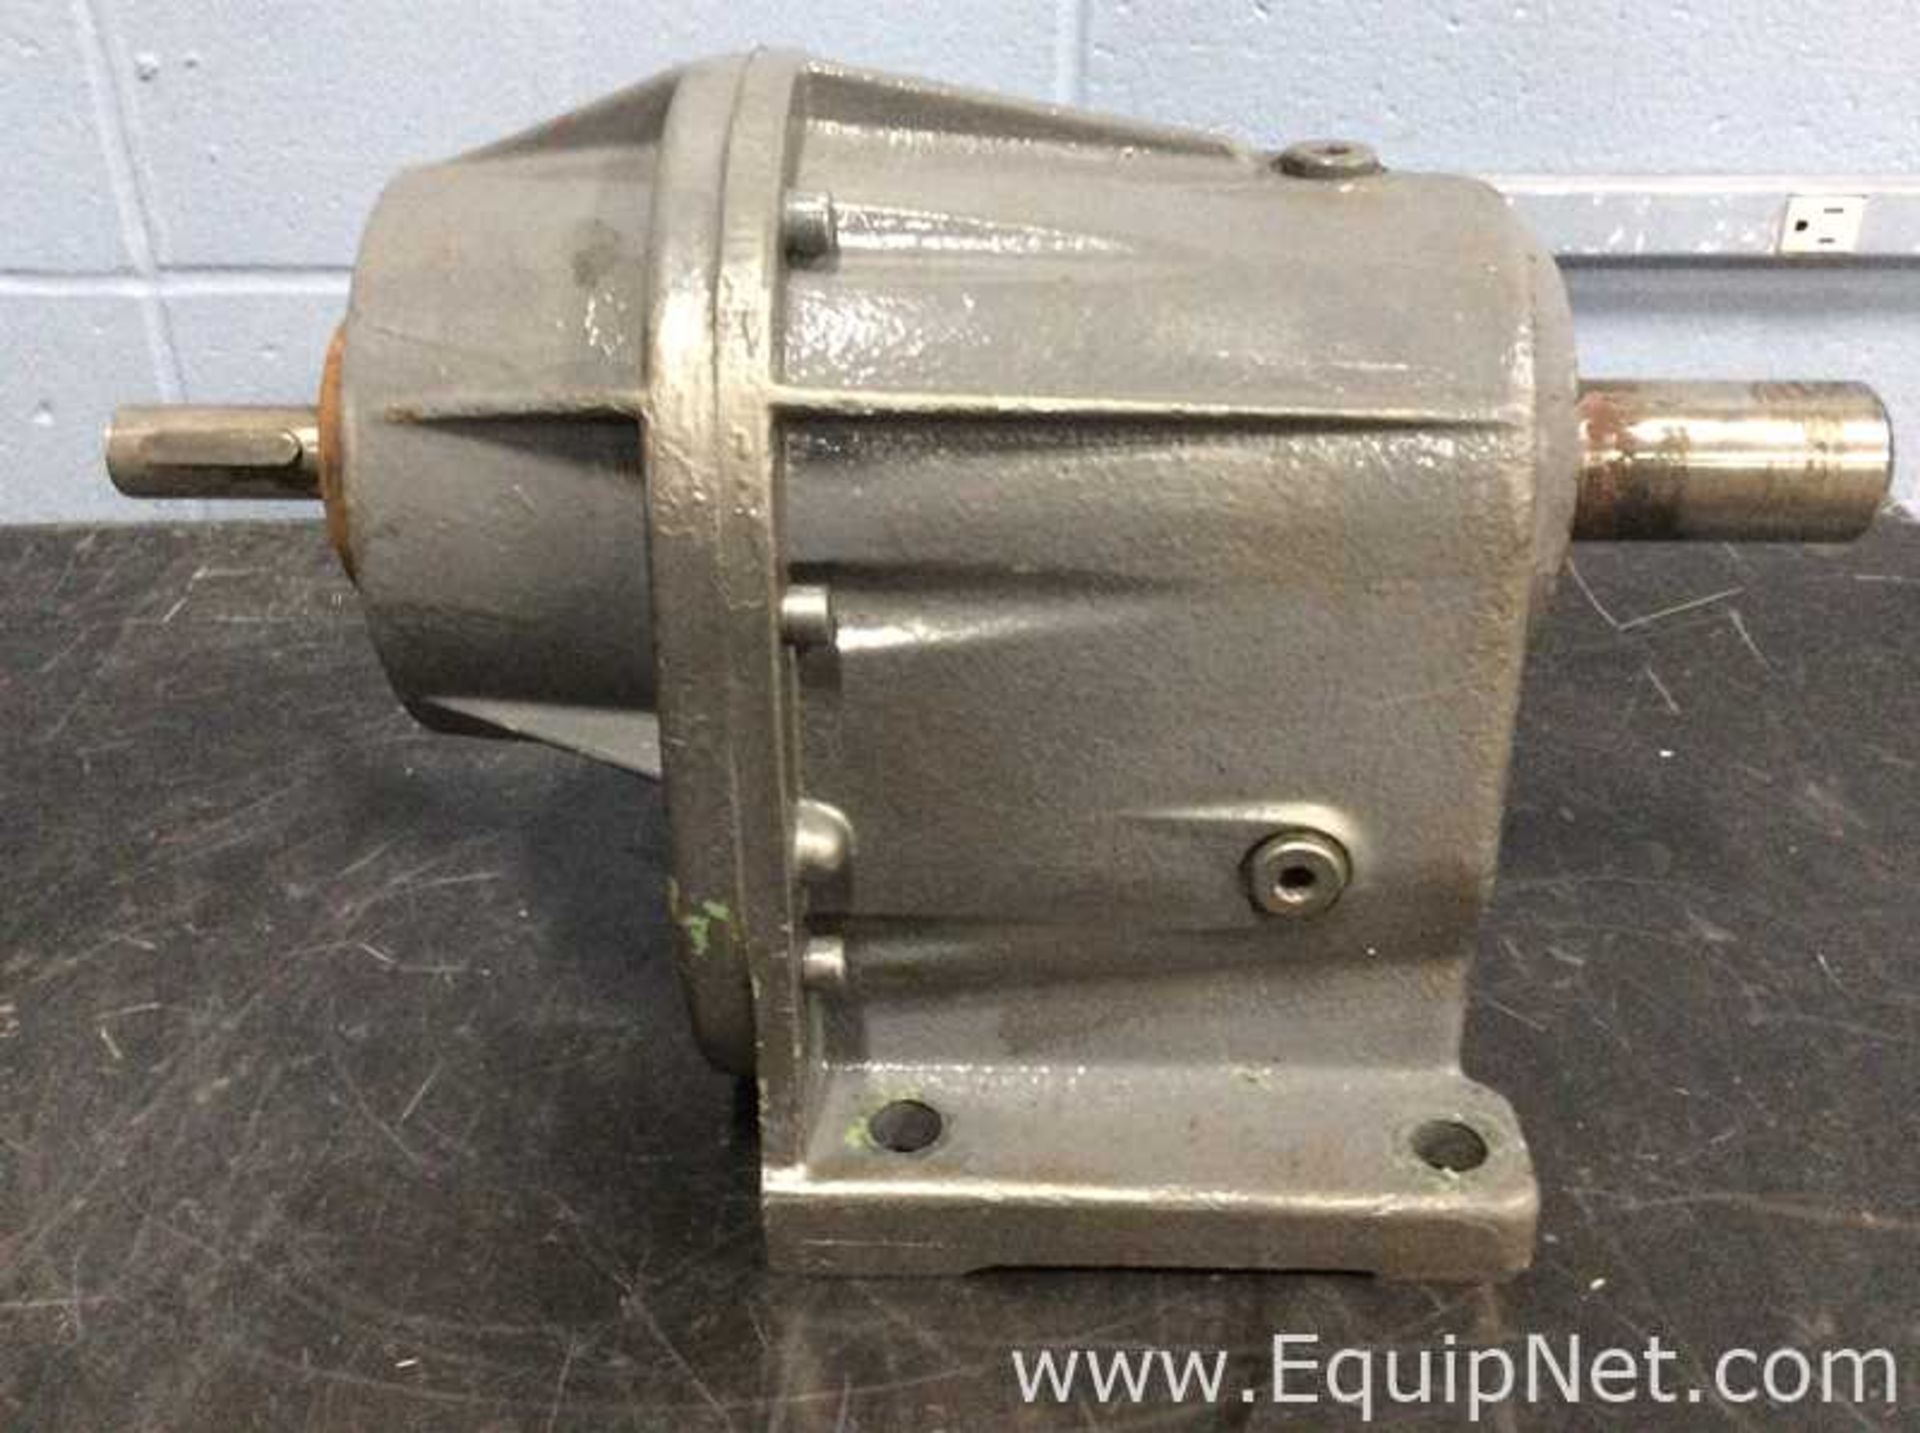 Lenze 12.206 electric Motor With Drive Box - Image 5 of 8